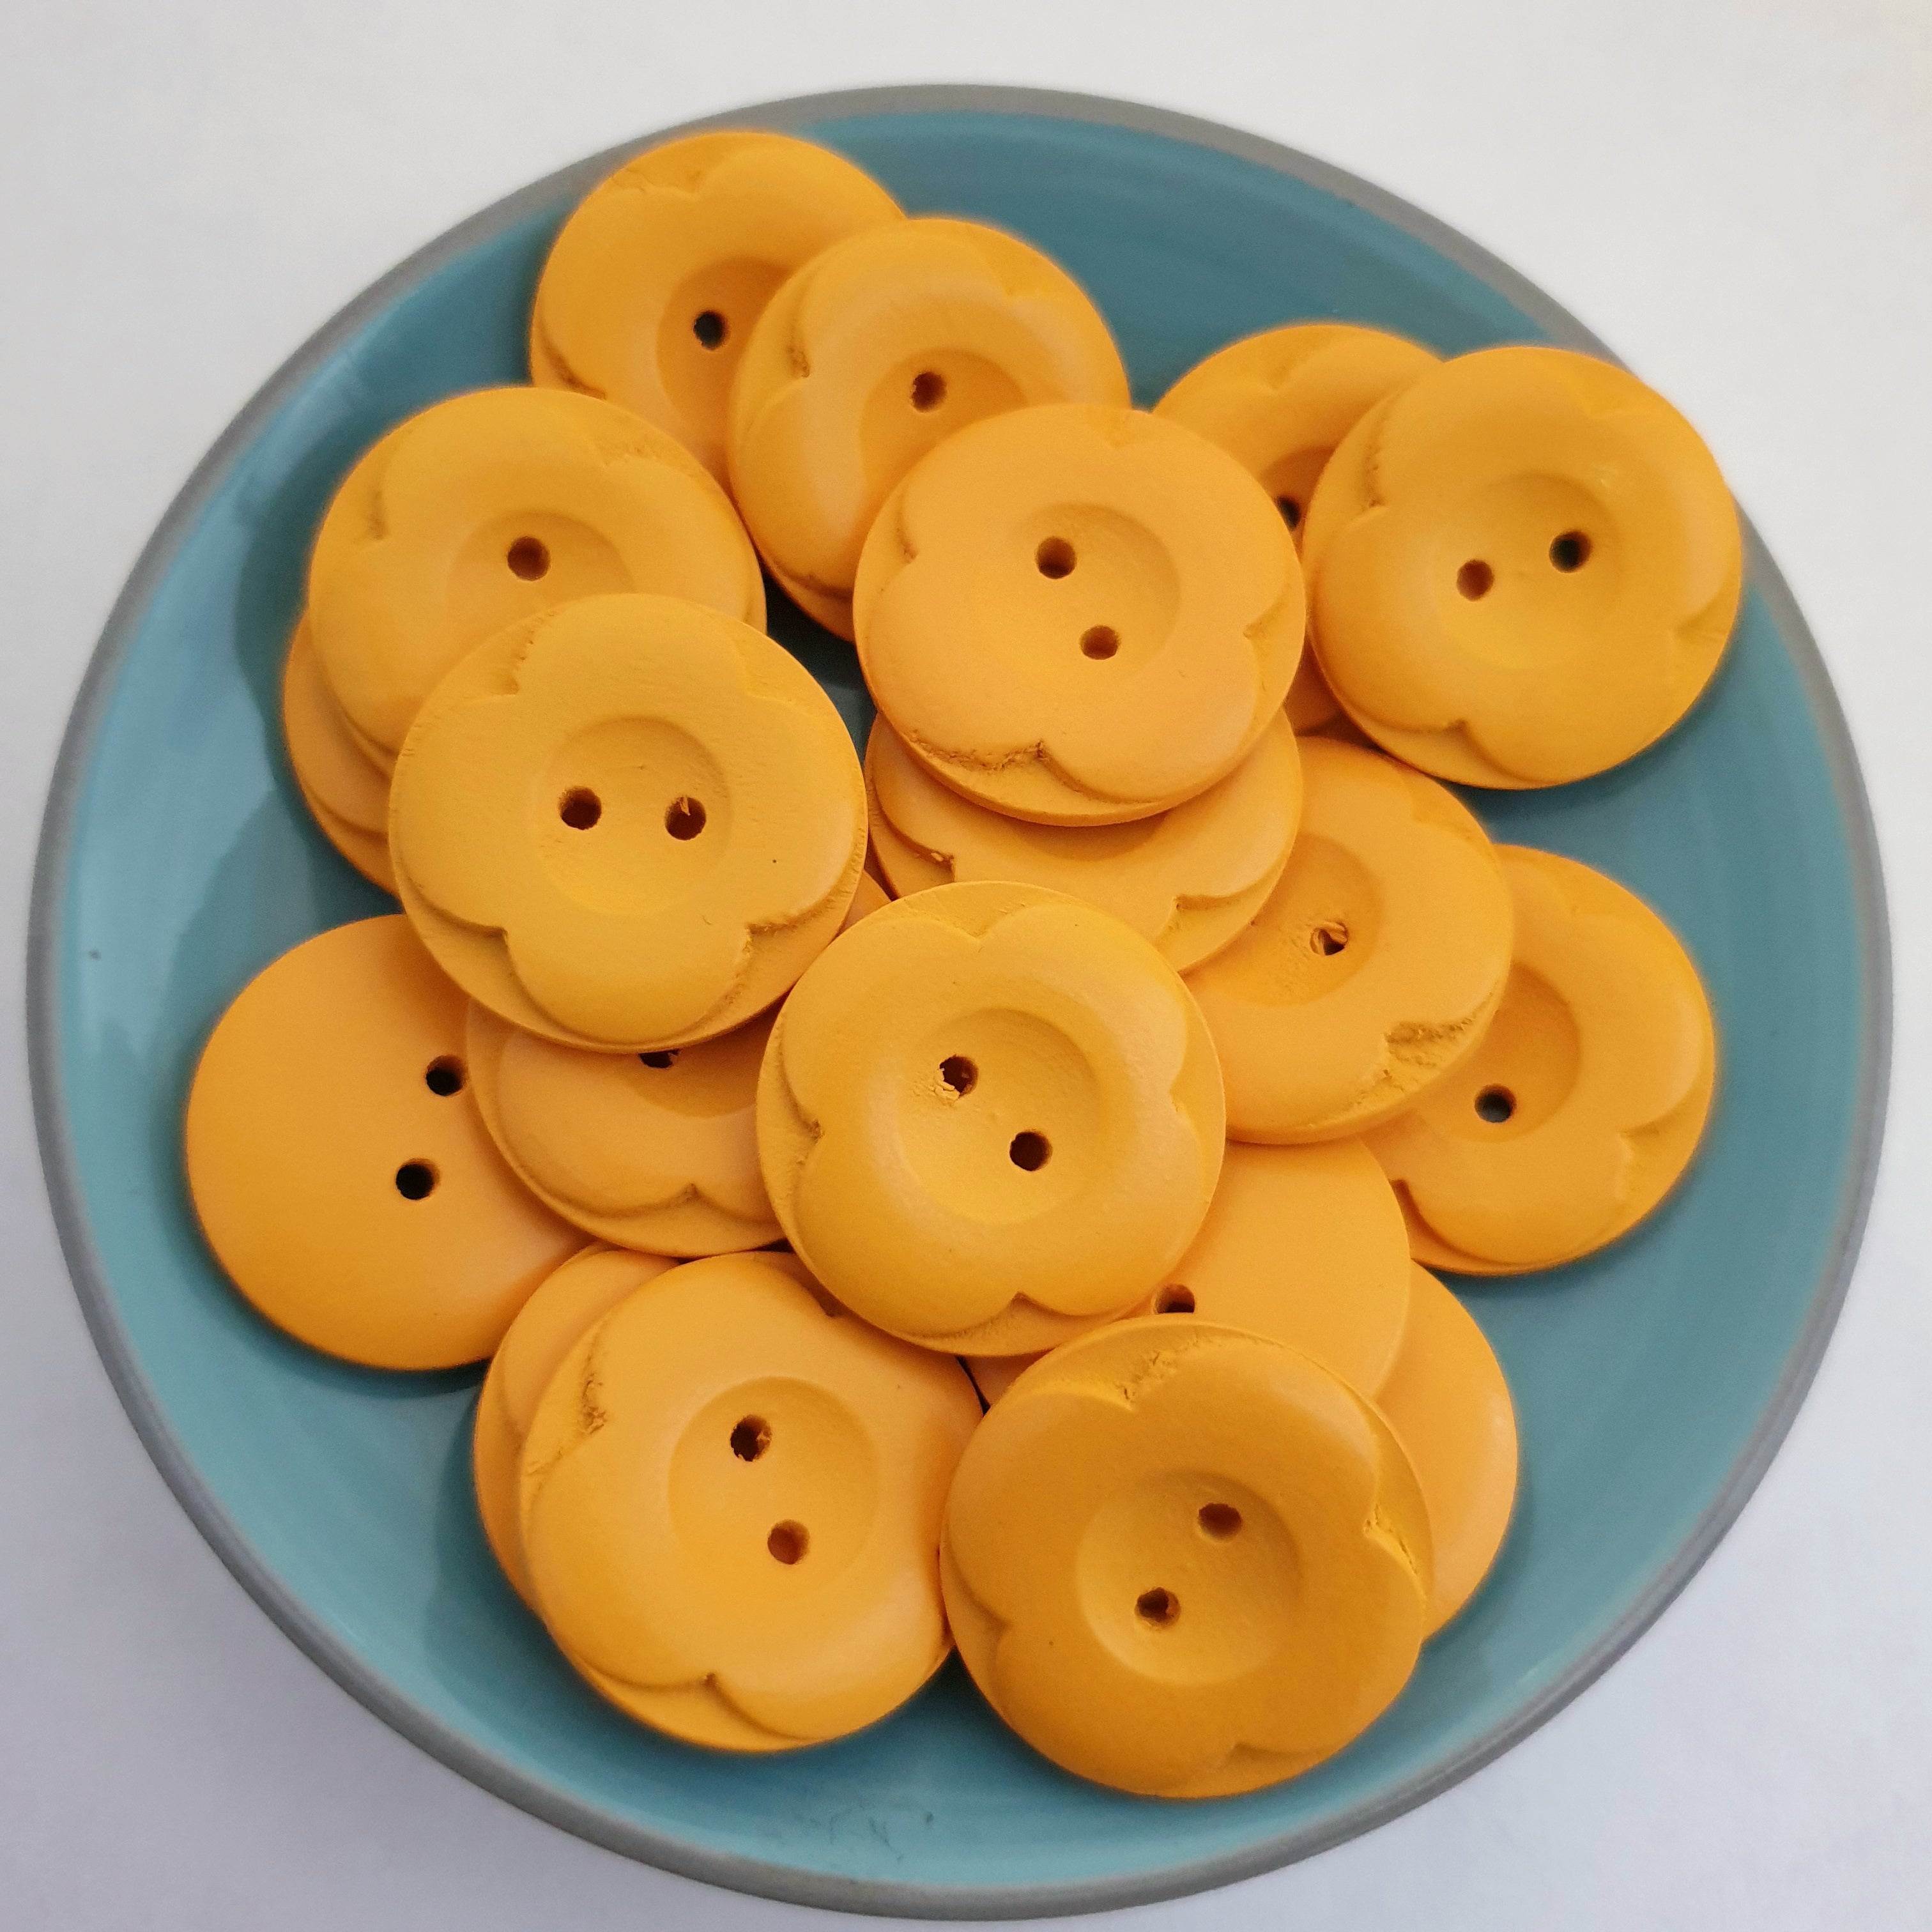 MajorCrafts 12pcs 25mm Mustard Yellow Carved Flower 2 Holes Round Wood Sewing Buttons